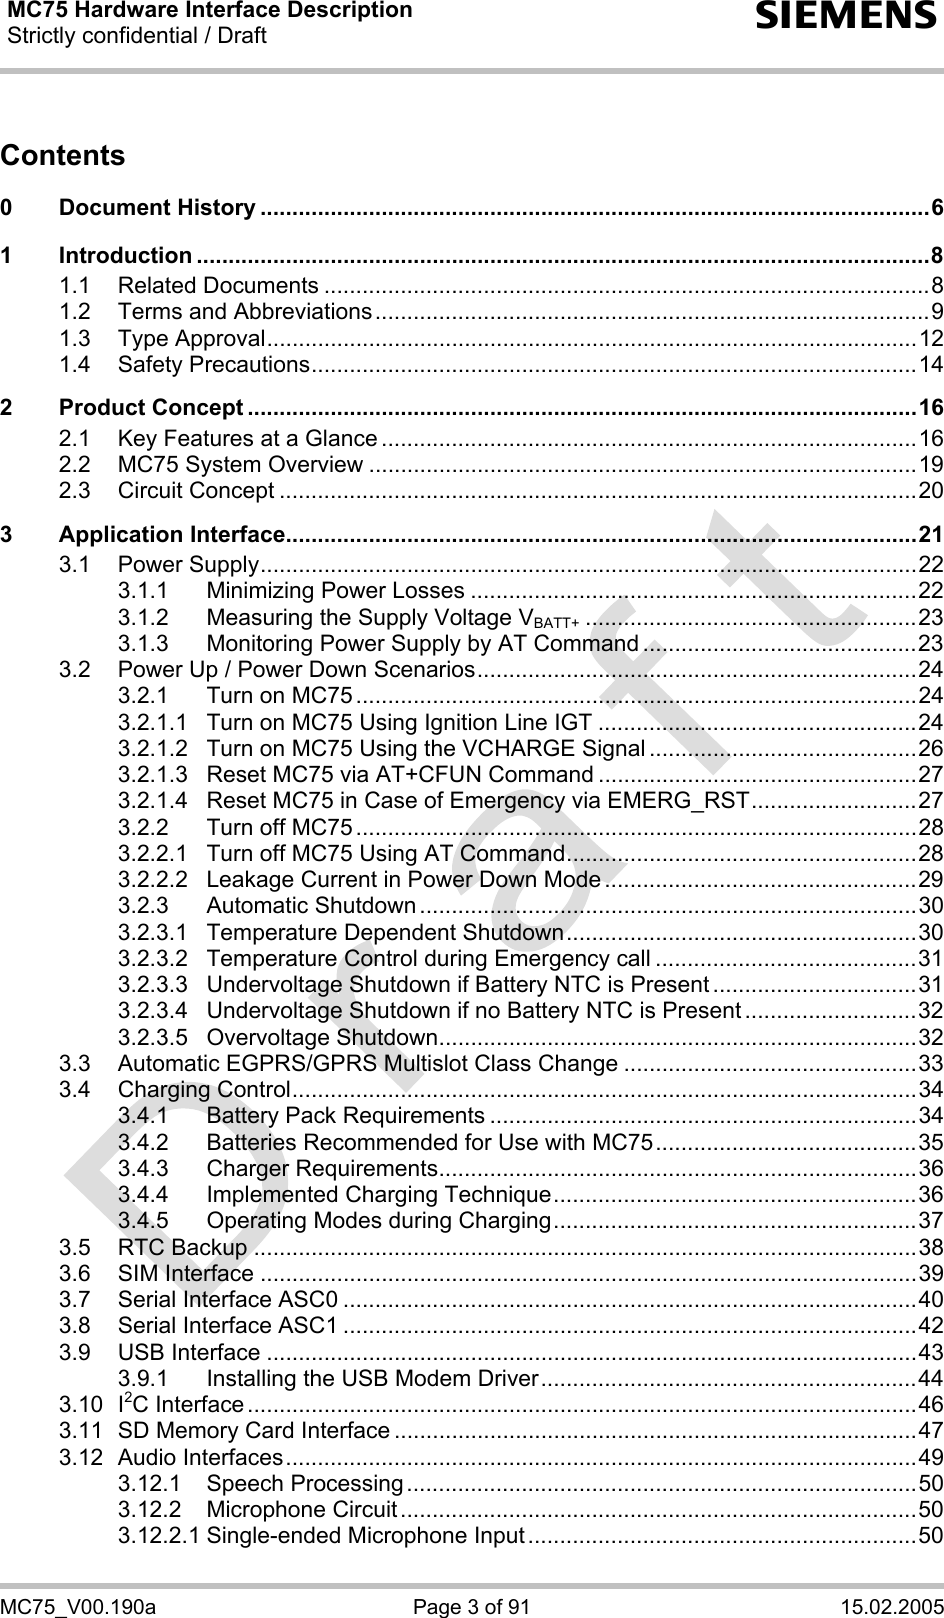 MC75 Hardware Interface Description Strictly confidential / Draft  s MC75_V00.190a  Page 3 of 91  15.02.2005 Contents  0 Document History .........................................................................................................6 1 Introduction ...................................................................................................................8 1.1 Related Documents ...............................................................................................8 1.2 Terms and Abbreviations.......................................................................................9 1.3 Type Approval......................................................................................................12 1.4 Safety Precautions...............................................................................................14 2 Product Concept .........................................................................................................16 2.1 Key Features at a Glance ....................................................................................16 2.2 MC75 System Overview ......................................................................................19 2.3 Circuit Concept ....................................................................................................20 3 Application Interface...................................................................................................21 3.1 Power Supply.......................................................................................................22 3.1.1 Minimizing Power Losses ......................................................................22 3.1.2 Measuring the Supply Voltage VBATT+ ....................................................23 3.1.3 Monitoring Power Supply by AT Command ...........................................23 3.2 Power Up / Power Down Scenarios.....................................................................24 3.2.1 Turn on MC75 ........................................................................................24 3.2.1.1 Turn on MC75 Using Ignition Line IGT ..................................................24 3.2.1.2 Turn on MC75 Using the VCHARGE Signal ..........................................26 3.2.1.3 Reset MC75 via AT+CFUN Command ..................................................27 3.2.1.4 Reset MC75 in Case of Emergency via EMERG_RST..........................27 3.2.2 Turn off MC75 ........................................................................................28 3.2.2.1 Turn off MC75 Using AT Command.......................................................28 3.2.2.2 Leakage Current in Power Down Mode .................................................29 3.2.3 Automatic Shutdown ..............................................................................30 3.2.3.1 Temperature Dependent Shutdown.......................................................30 3.2.3.2 Temperature Control during Emergency call .........................................31 3.2.3.3 Undervoltage Shutdown if Battery NTC is Present ................................31 3.2.3.4 Undervoltage Shutdown if no Battery NTC is Present ...........................32 3.2.3.5 Overvoltage Shutdown...........................................................................32 3.3 Automatic EGPRS/GPRS Multislot Class Change ..............................................33 3.4 Charging Control..................................................................................................34 3.4.1 Battery Pack Requirements ...................................................................34 3.4.2 Batteries Recommended for Use with MC75.........................................35 3.4.3 Charger Requirements...........................................................................36 3.4.4 Implemented Charging Technique.........................................................36 3.4.5 Operating Modes during Charging.........................................................37 3.5 RTC Backup ........................................................................................................38 3.6 SIM Interface .......................................................................................................39 3.7 Serial Interface ASC0 ..........................................................................................40 3.8 Serial Interface ASC1 ..........................................................................................42 3.9 USB Interface ......................................................................................................43 3.9.1 Installing the USB Modem Driver...........................................................44 3.10 I2C Interface .........................................................................................................46 3.11 SD Memory Card Interface ..................................................................................47 3.12 Audio Interfaces...................................................................................................49 3.12.1 Speech Processing................................................................................50 3.12.2 Microphone Circuit.................................................................................50 3.12.2.1 Single-ended Microphone Input.............................................................50 